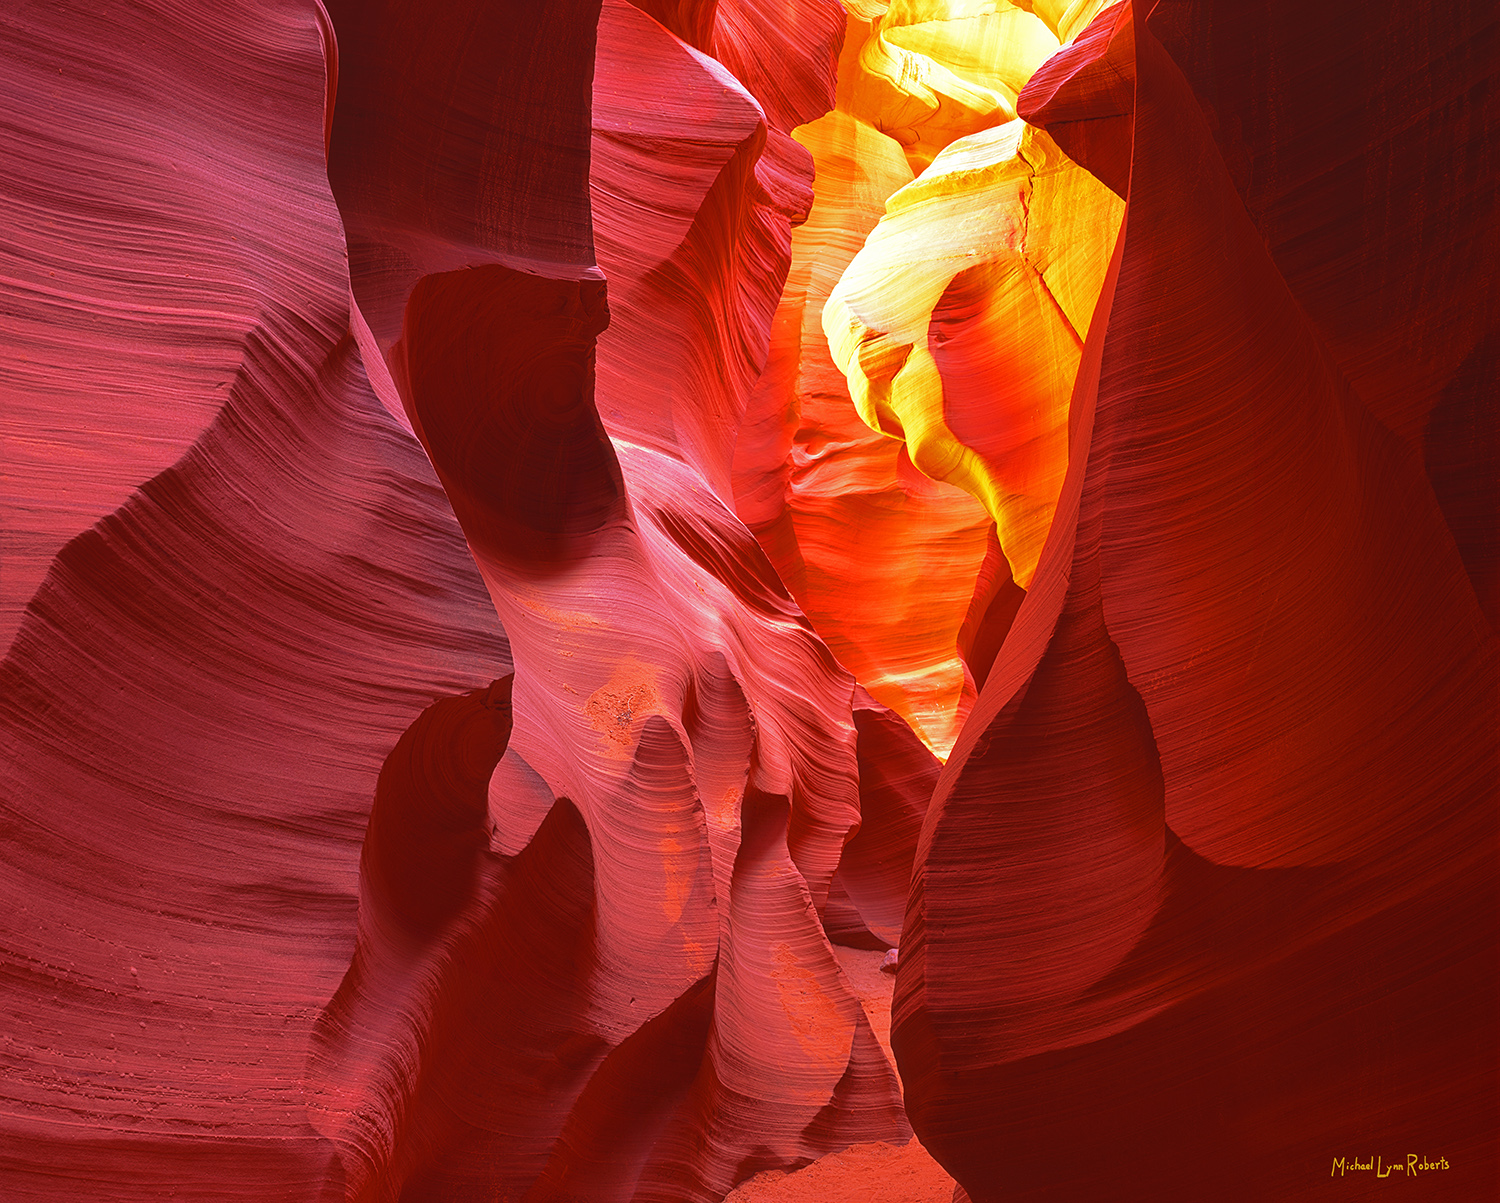 I came to this amazing open chamber in Lower Antelope Canyon on one visit. I was nearing the end of my allotted time and was...